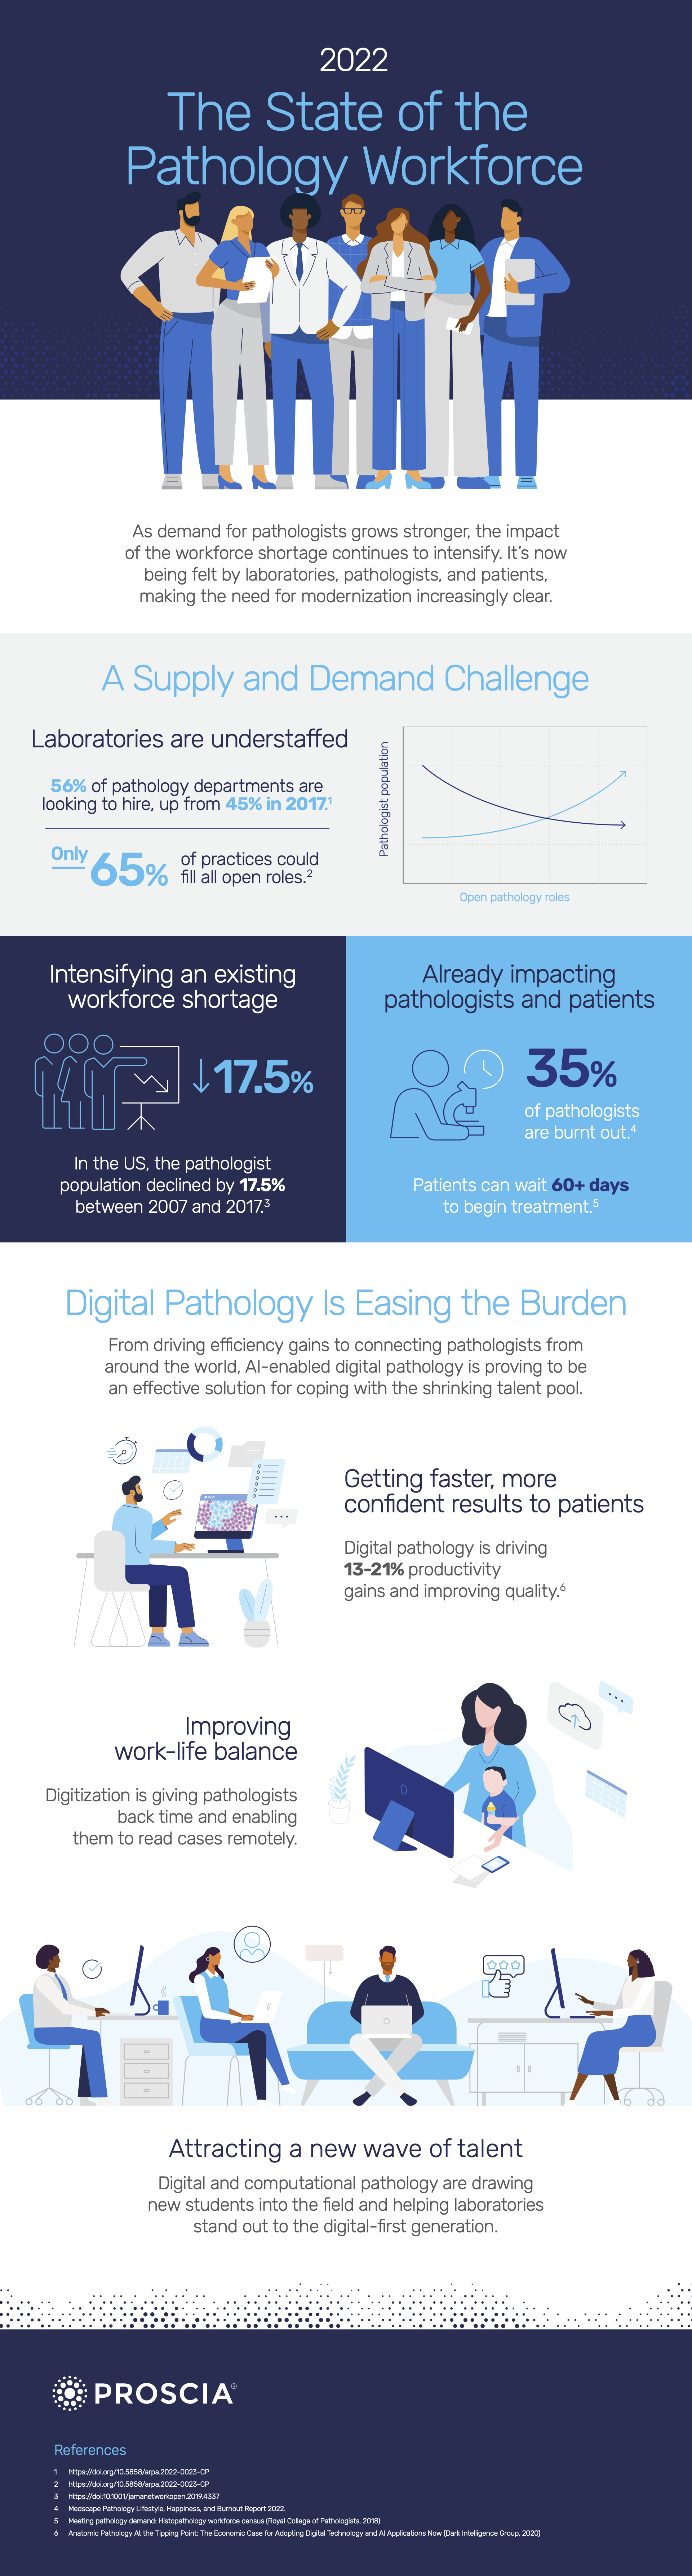 [Infographic] The State Of The Pathology Workforce: 2022